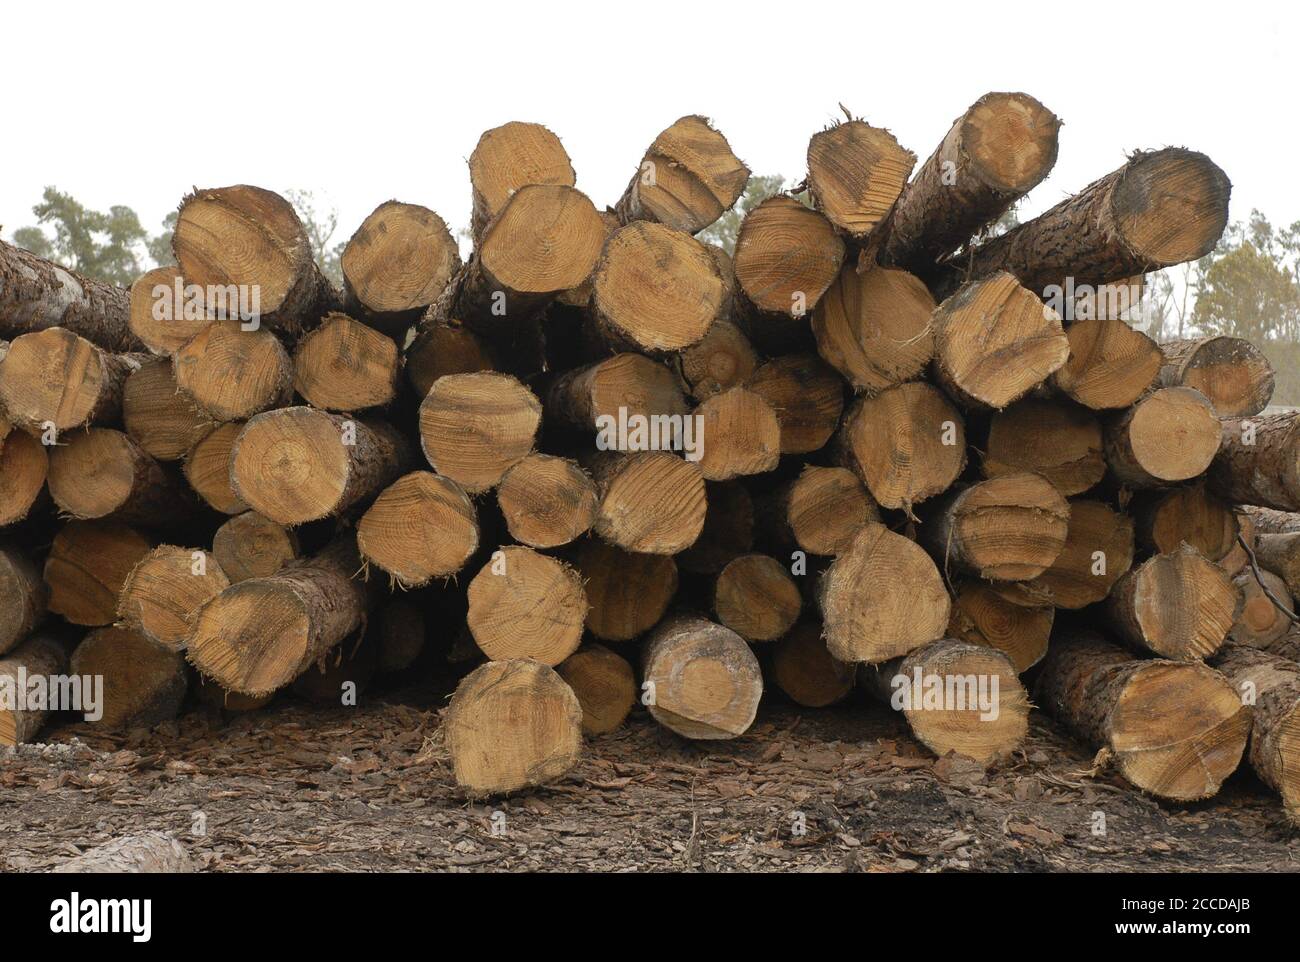 Orange, TX November 10, 2006: East Texas pine logs at Rogers Lumber Company. Rogers Lumber Co processes pine lumber into rough-cut boards for the construction and trucking industries      ©Bob Daemmrich/ Stock Photo